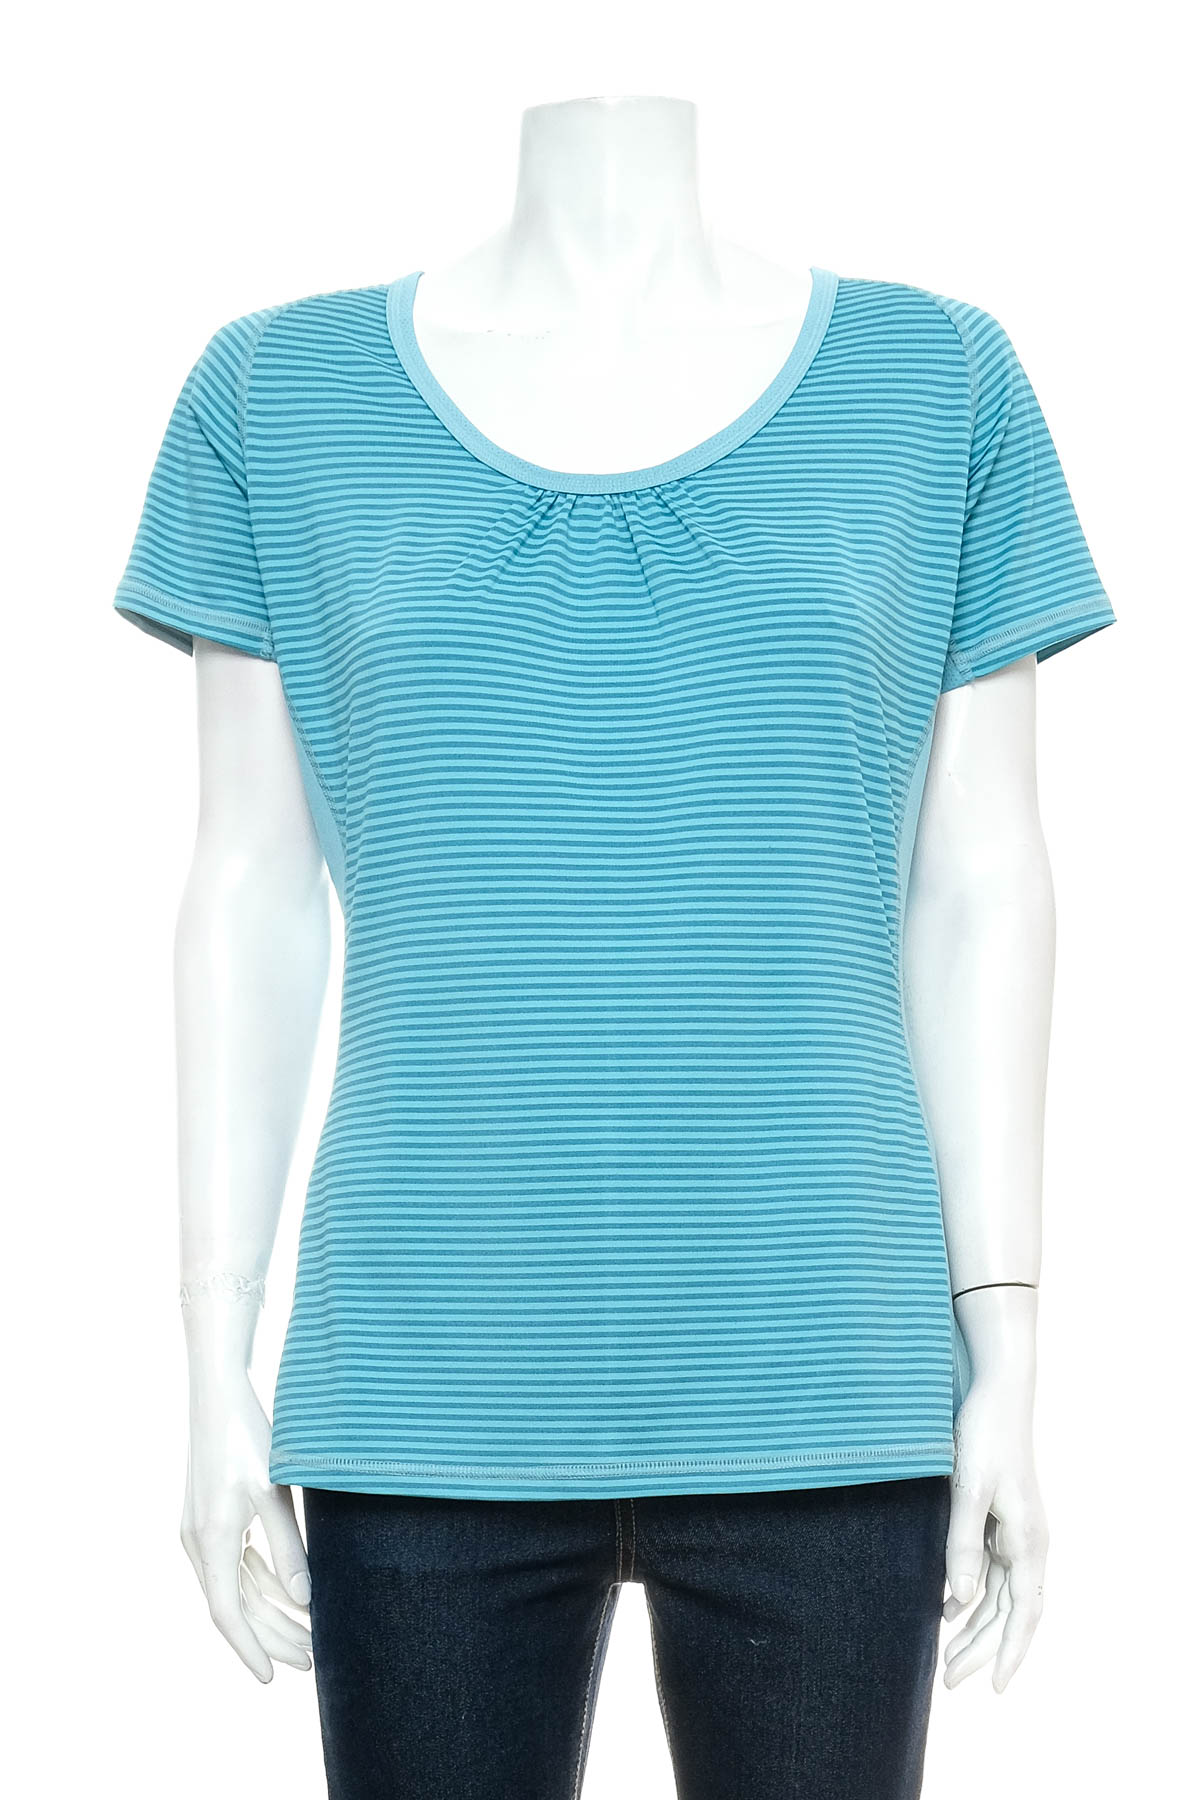 Women's t-shirt - The North Face - 0